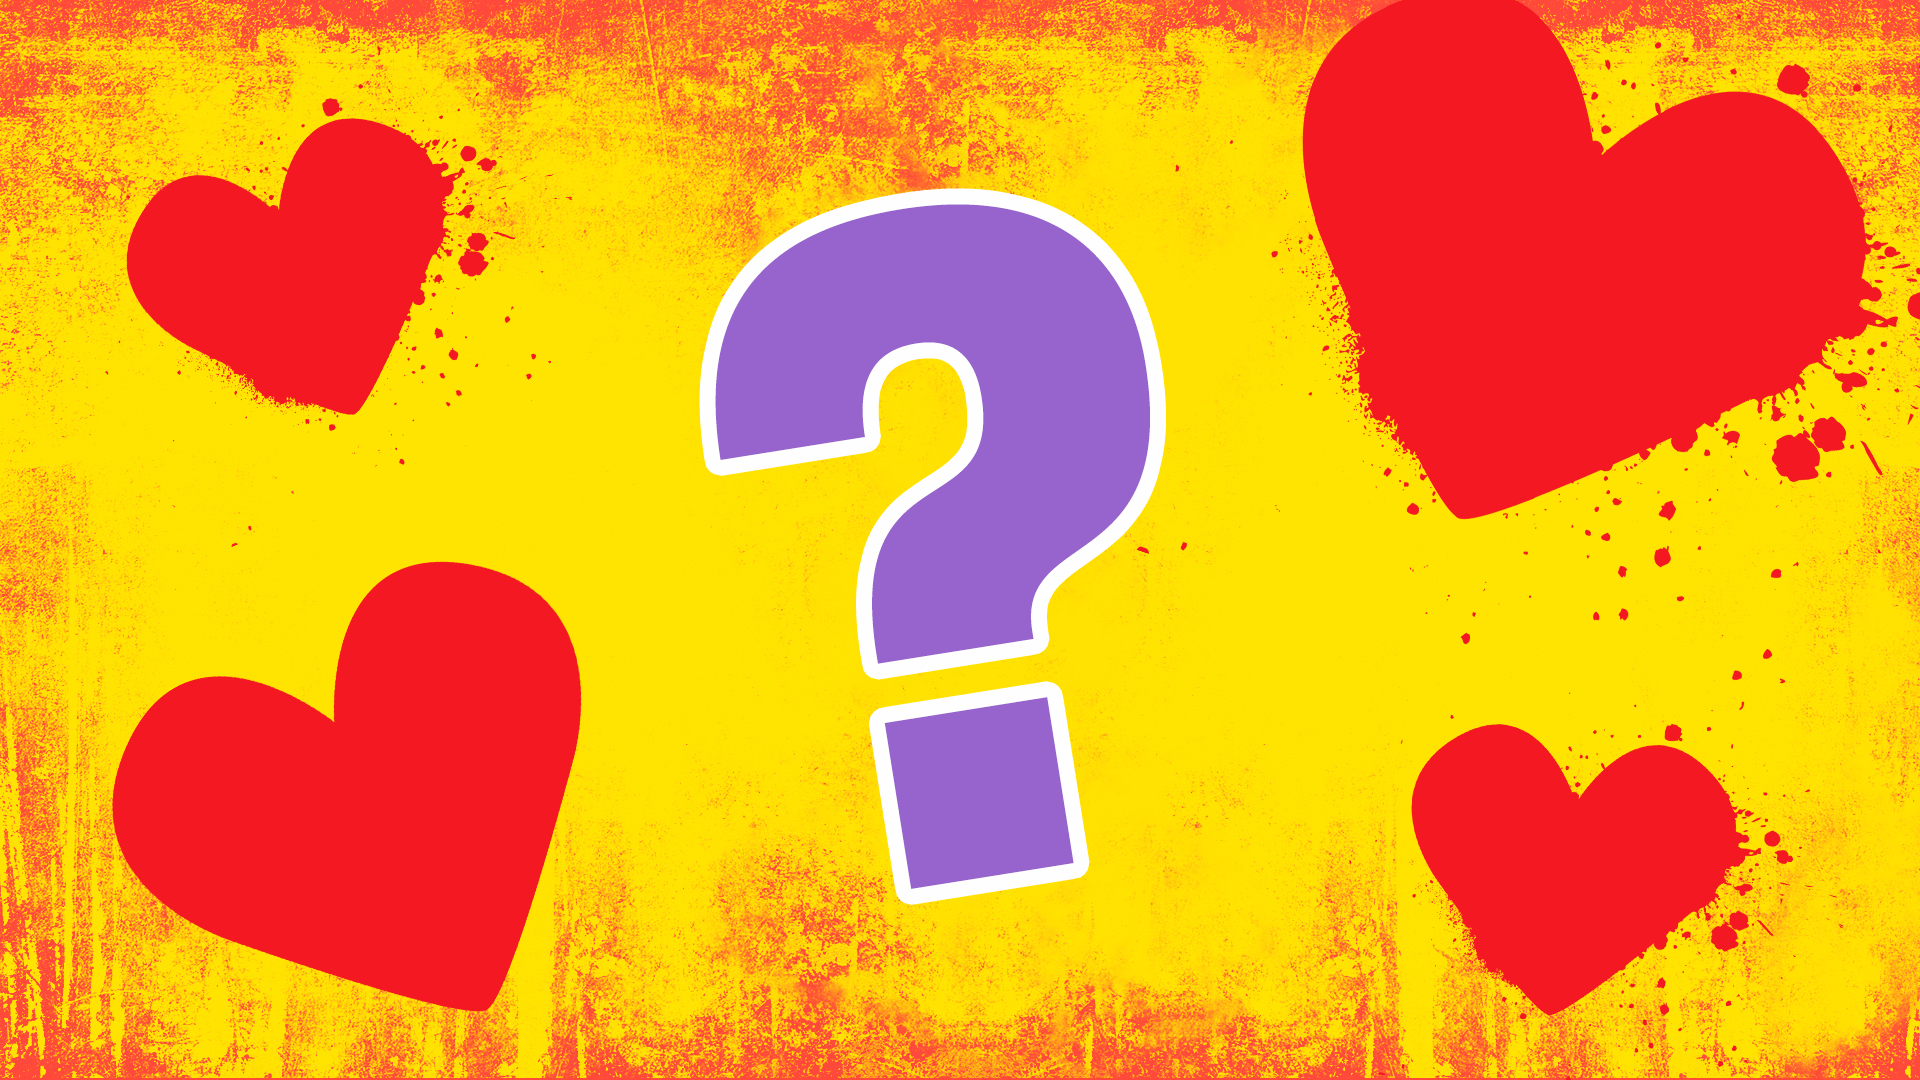 Love hearts and question mark on orange background 